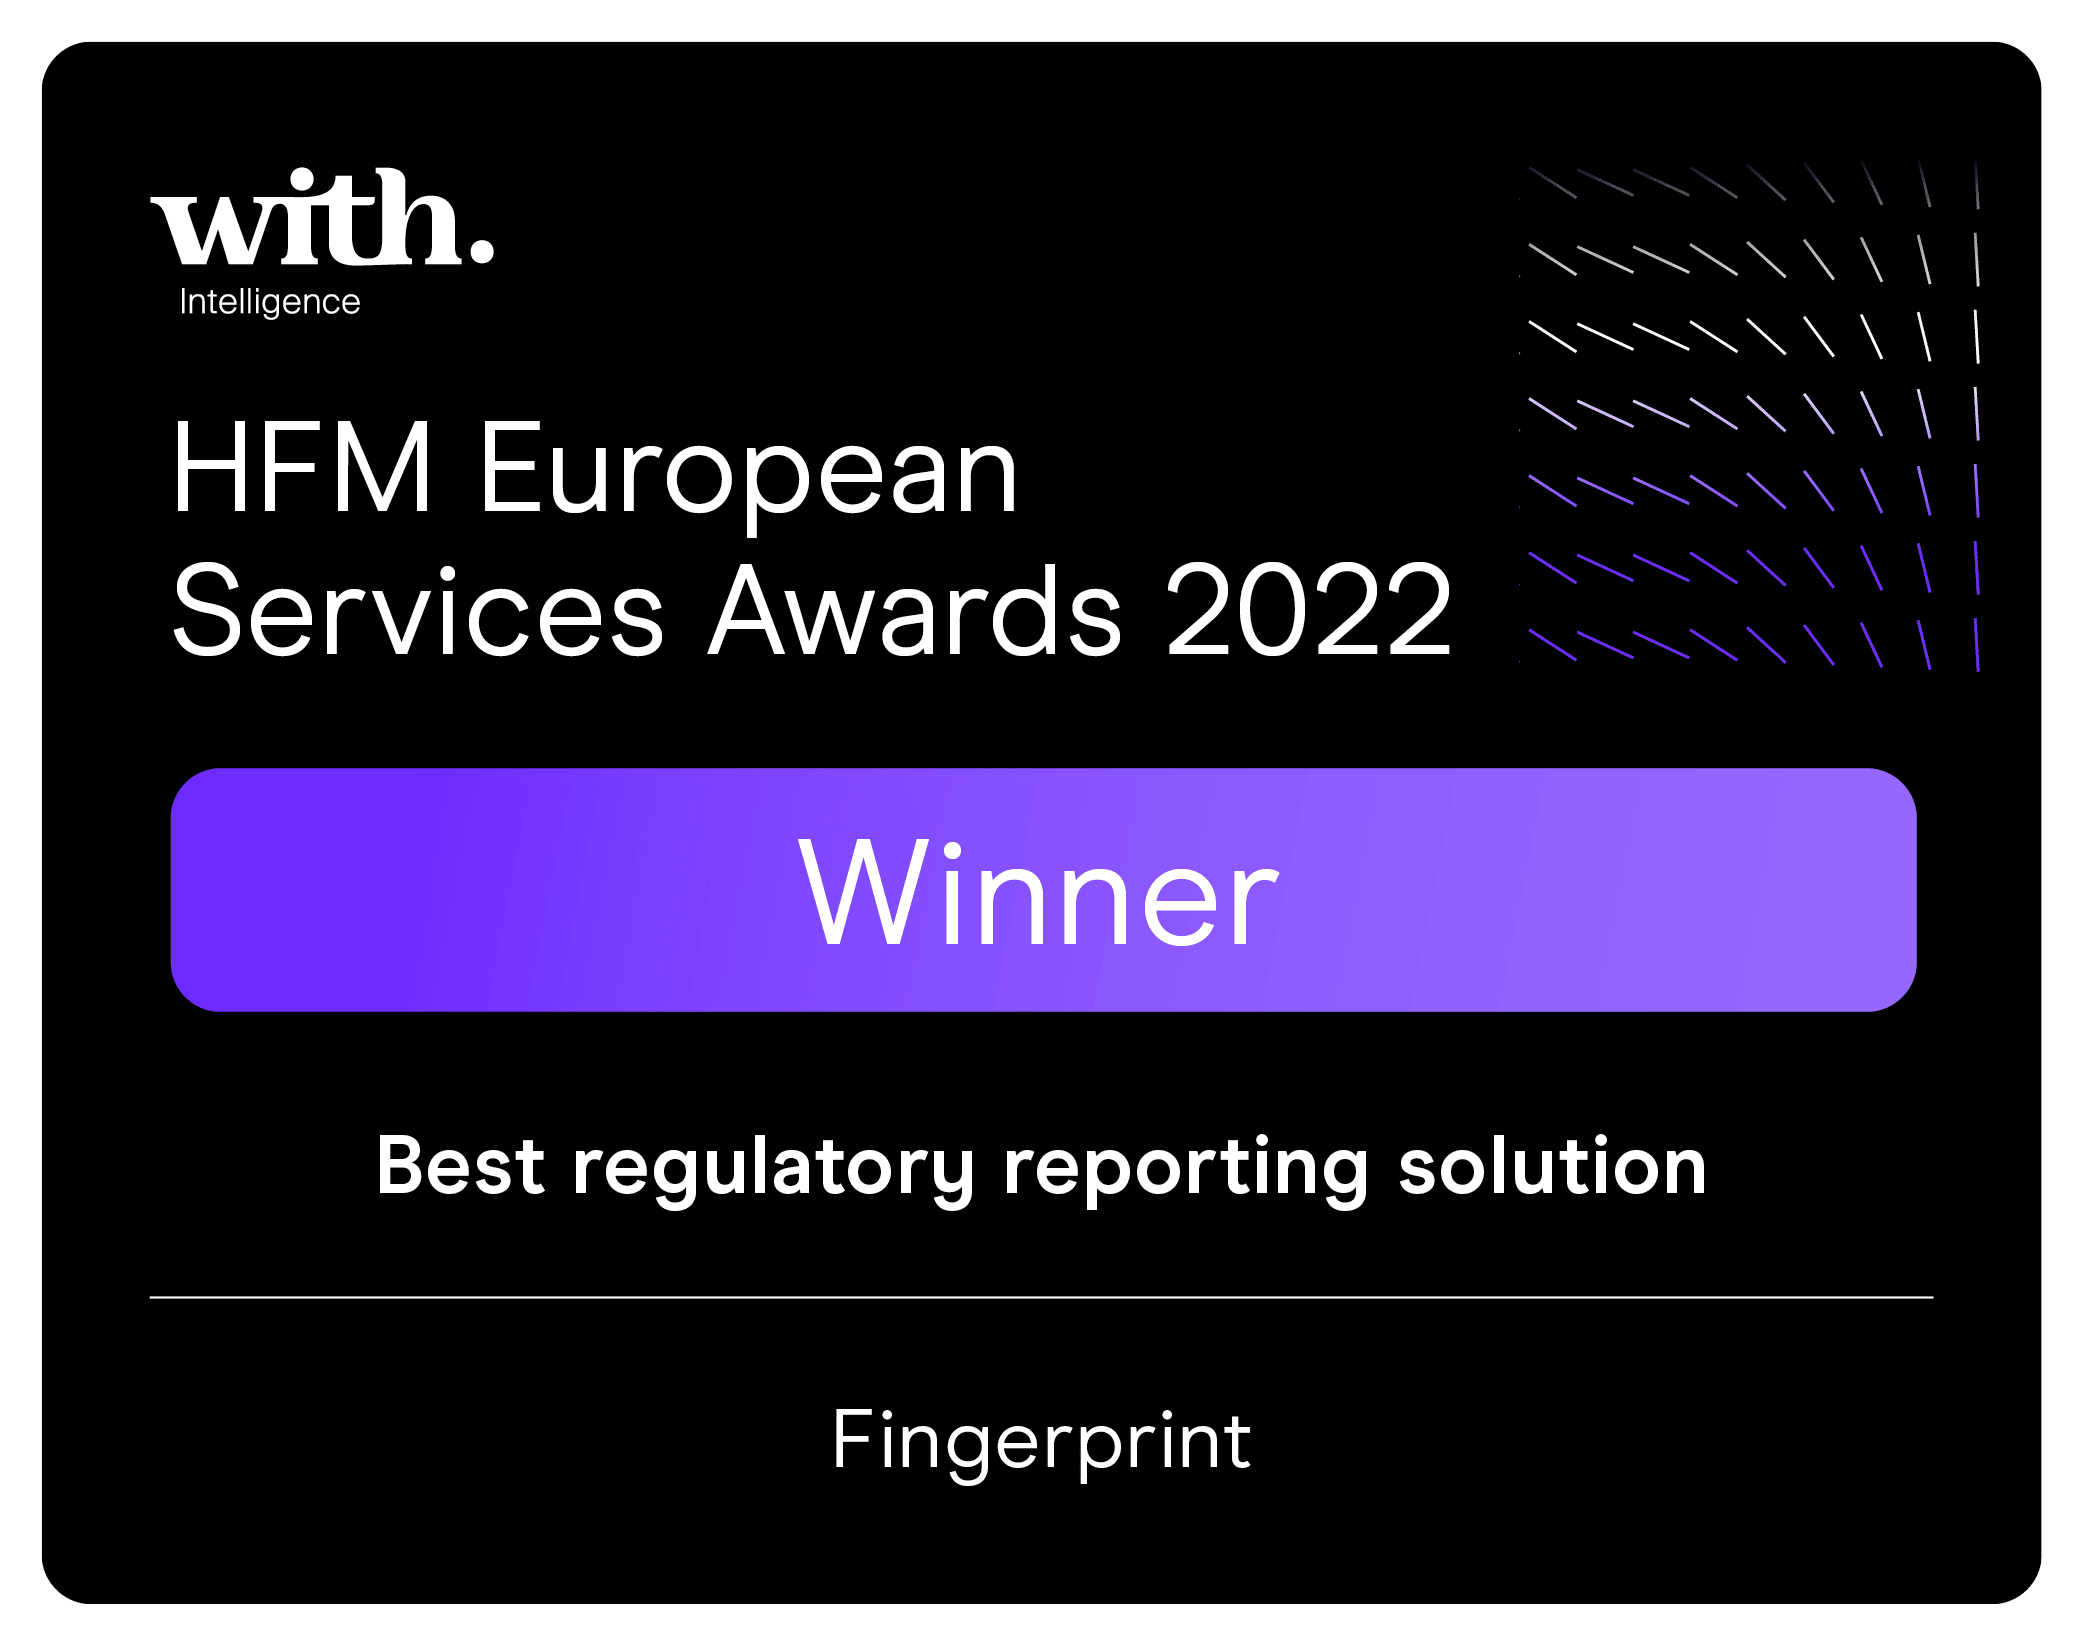 FP Supervision awarded Best Regulatory Reporting Solution by HFM